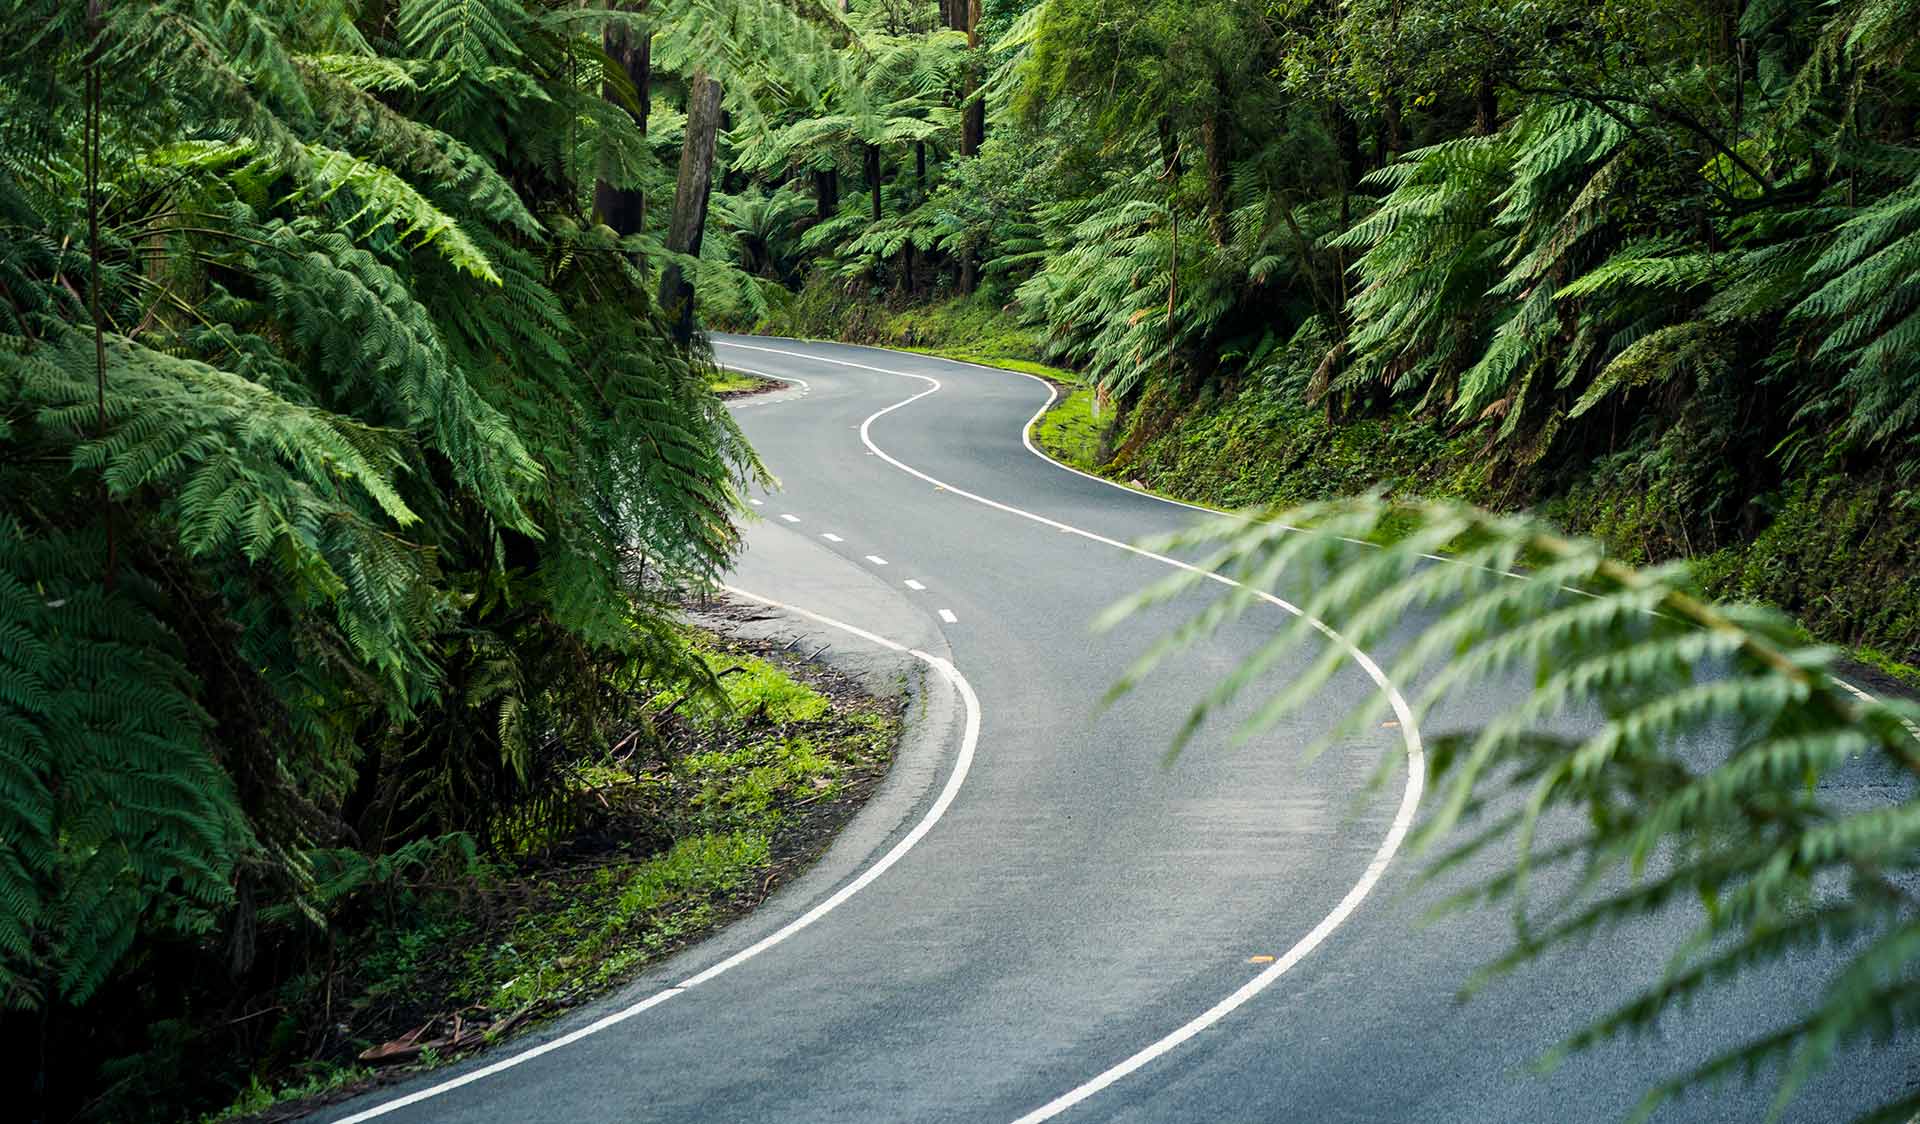 A road winds through a lush temporate rain forest.